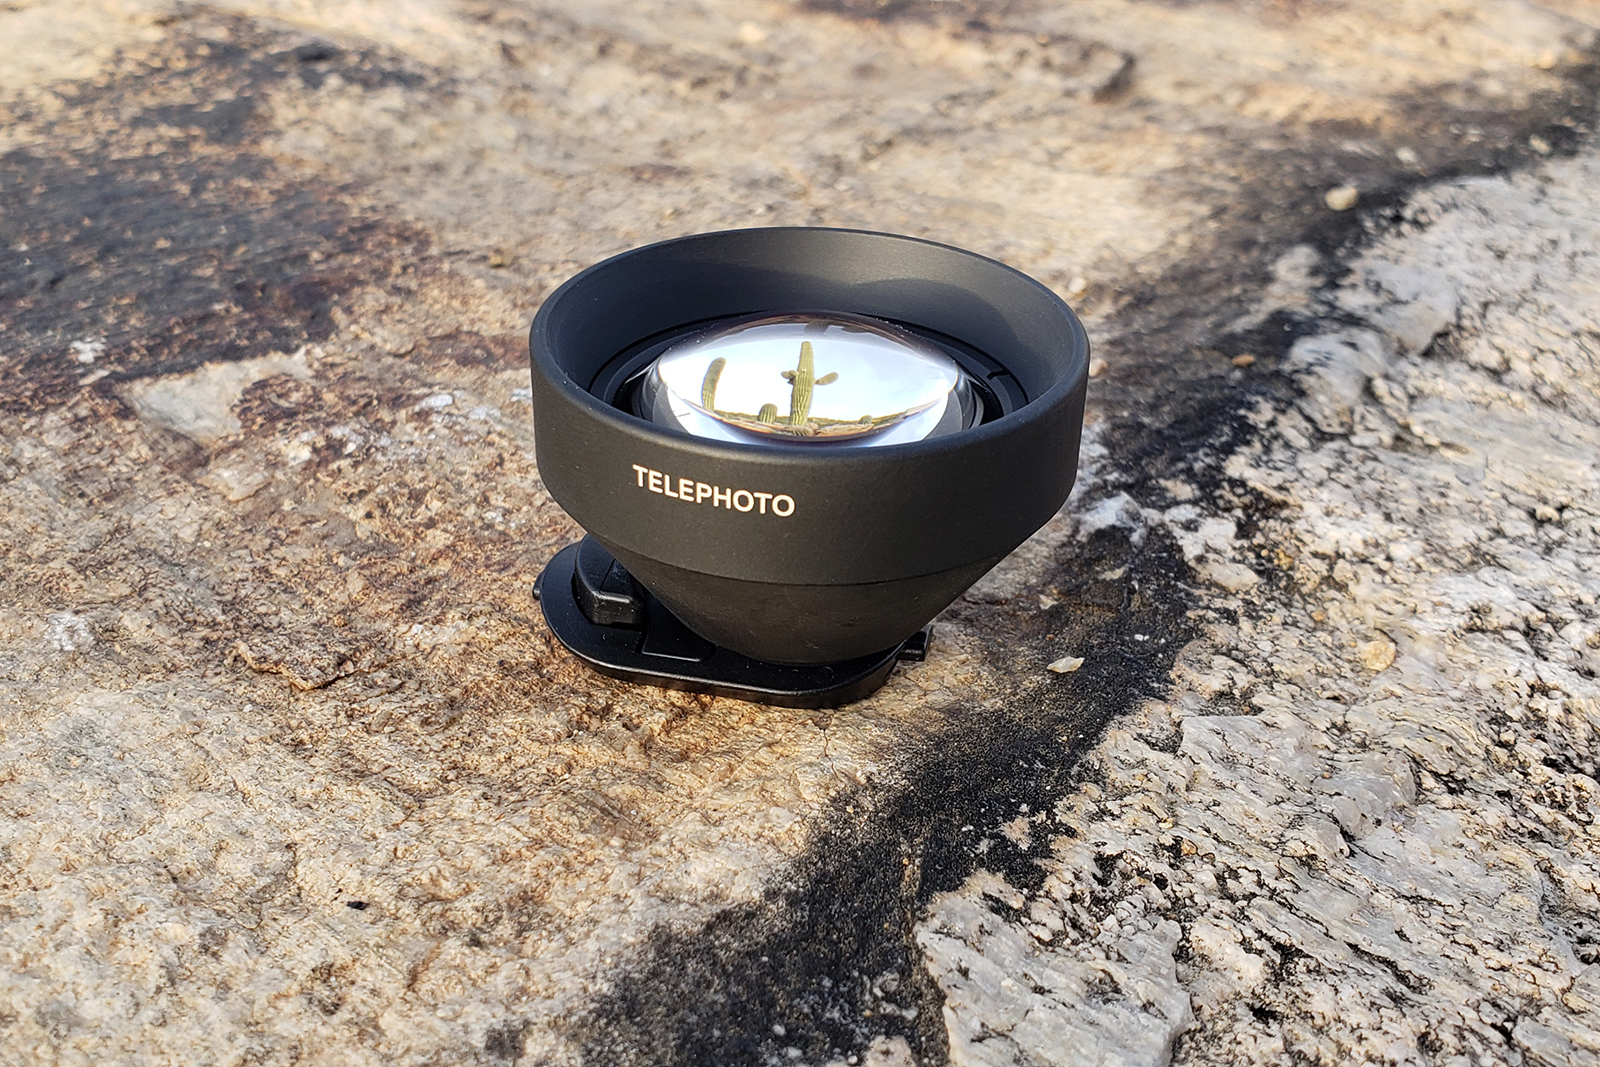 olloclip intro pro series launches telephoto featured